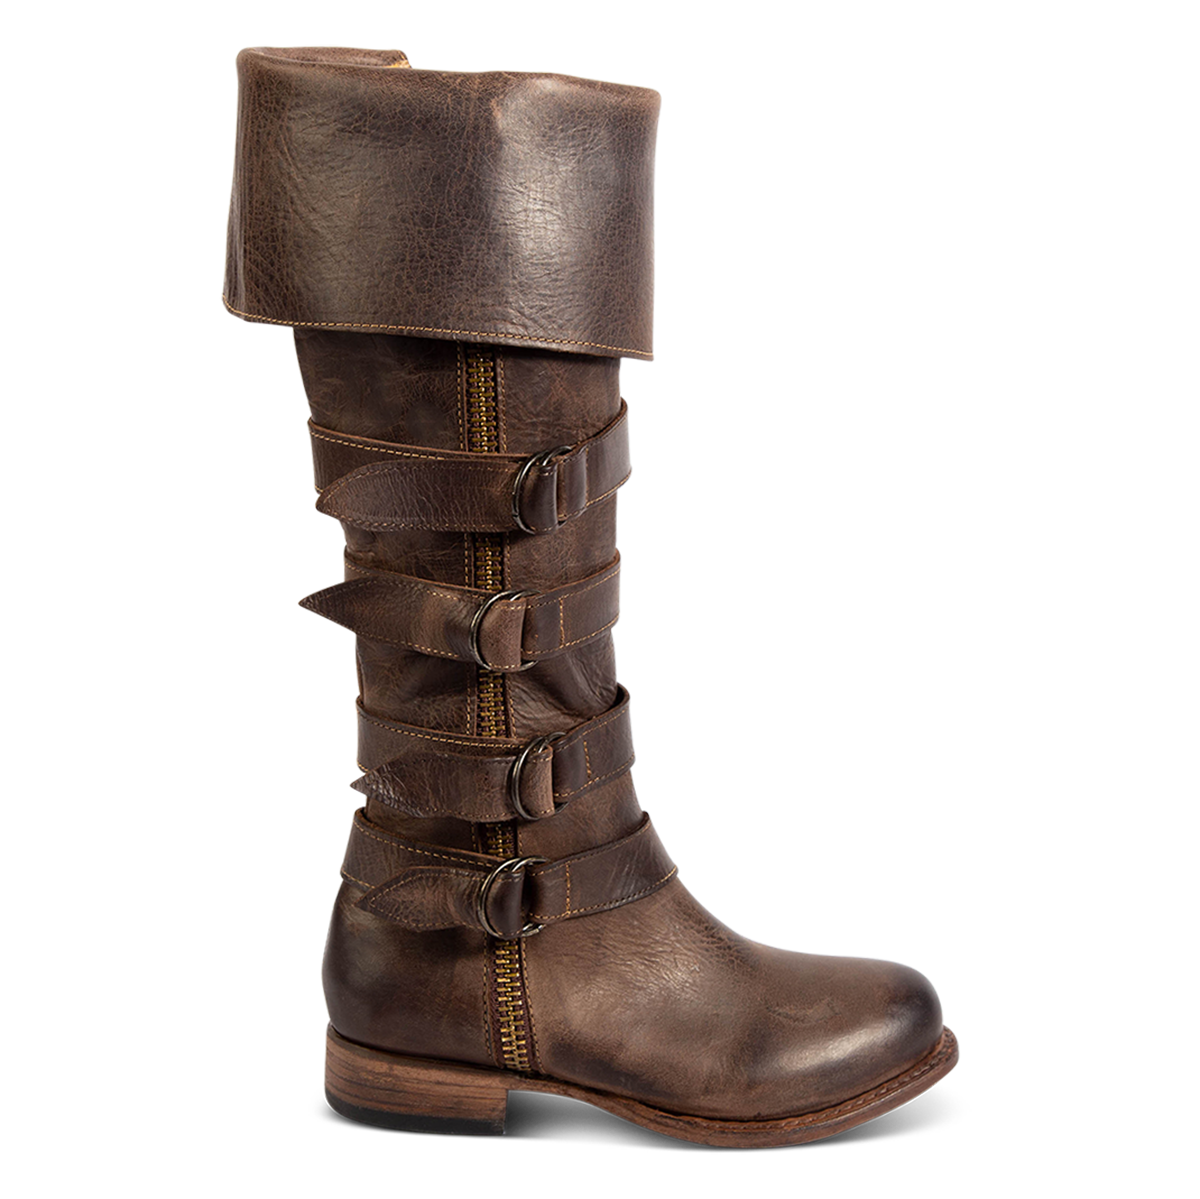 FREEBIRD women's Risky brown fold-over tall leather boot with buckle loop detailing and zip closures